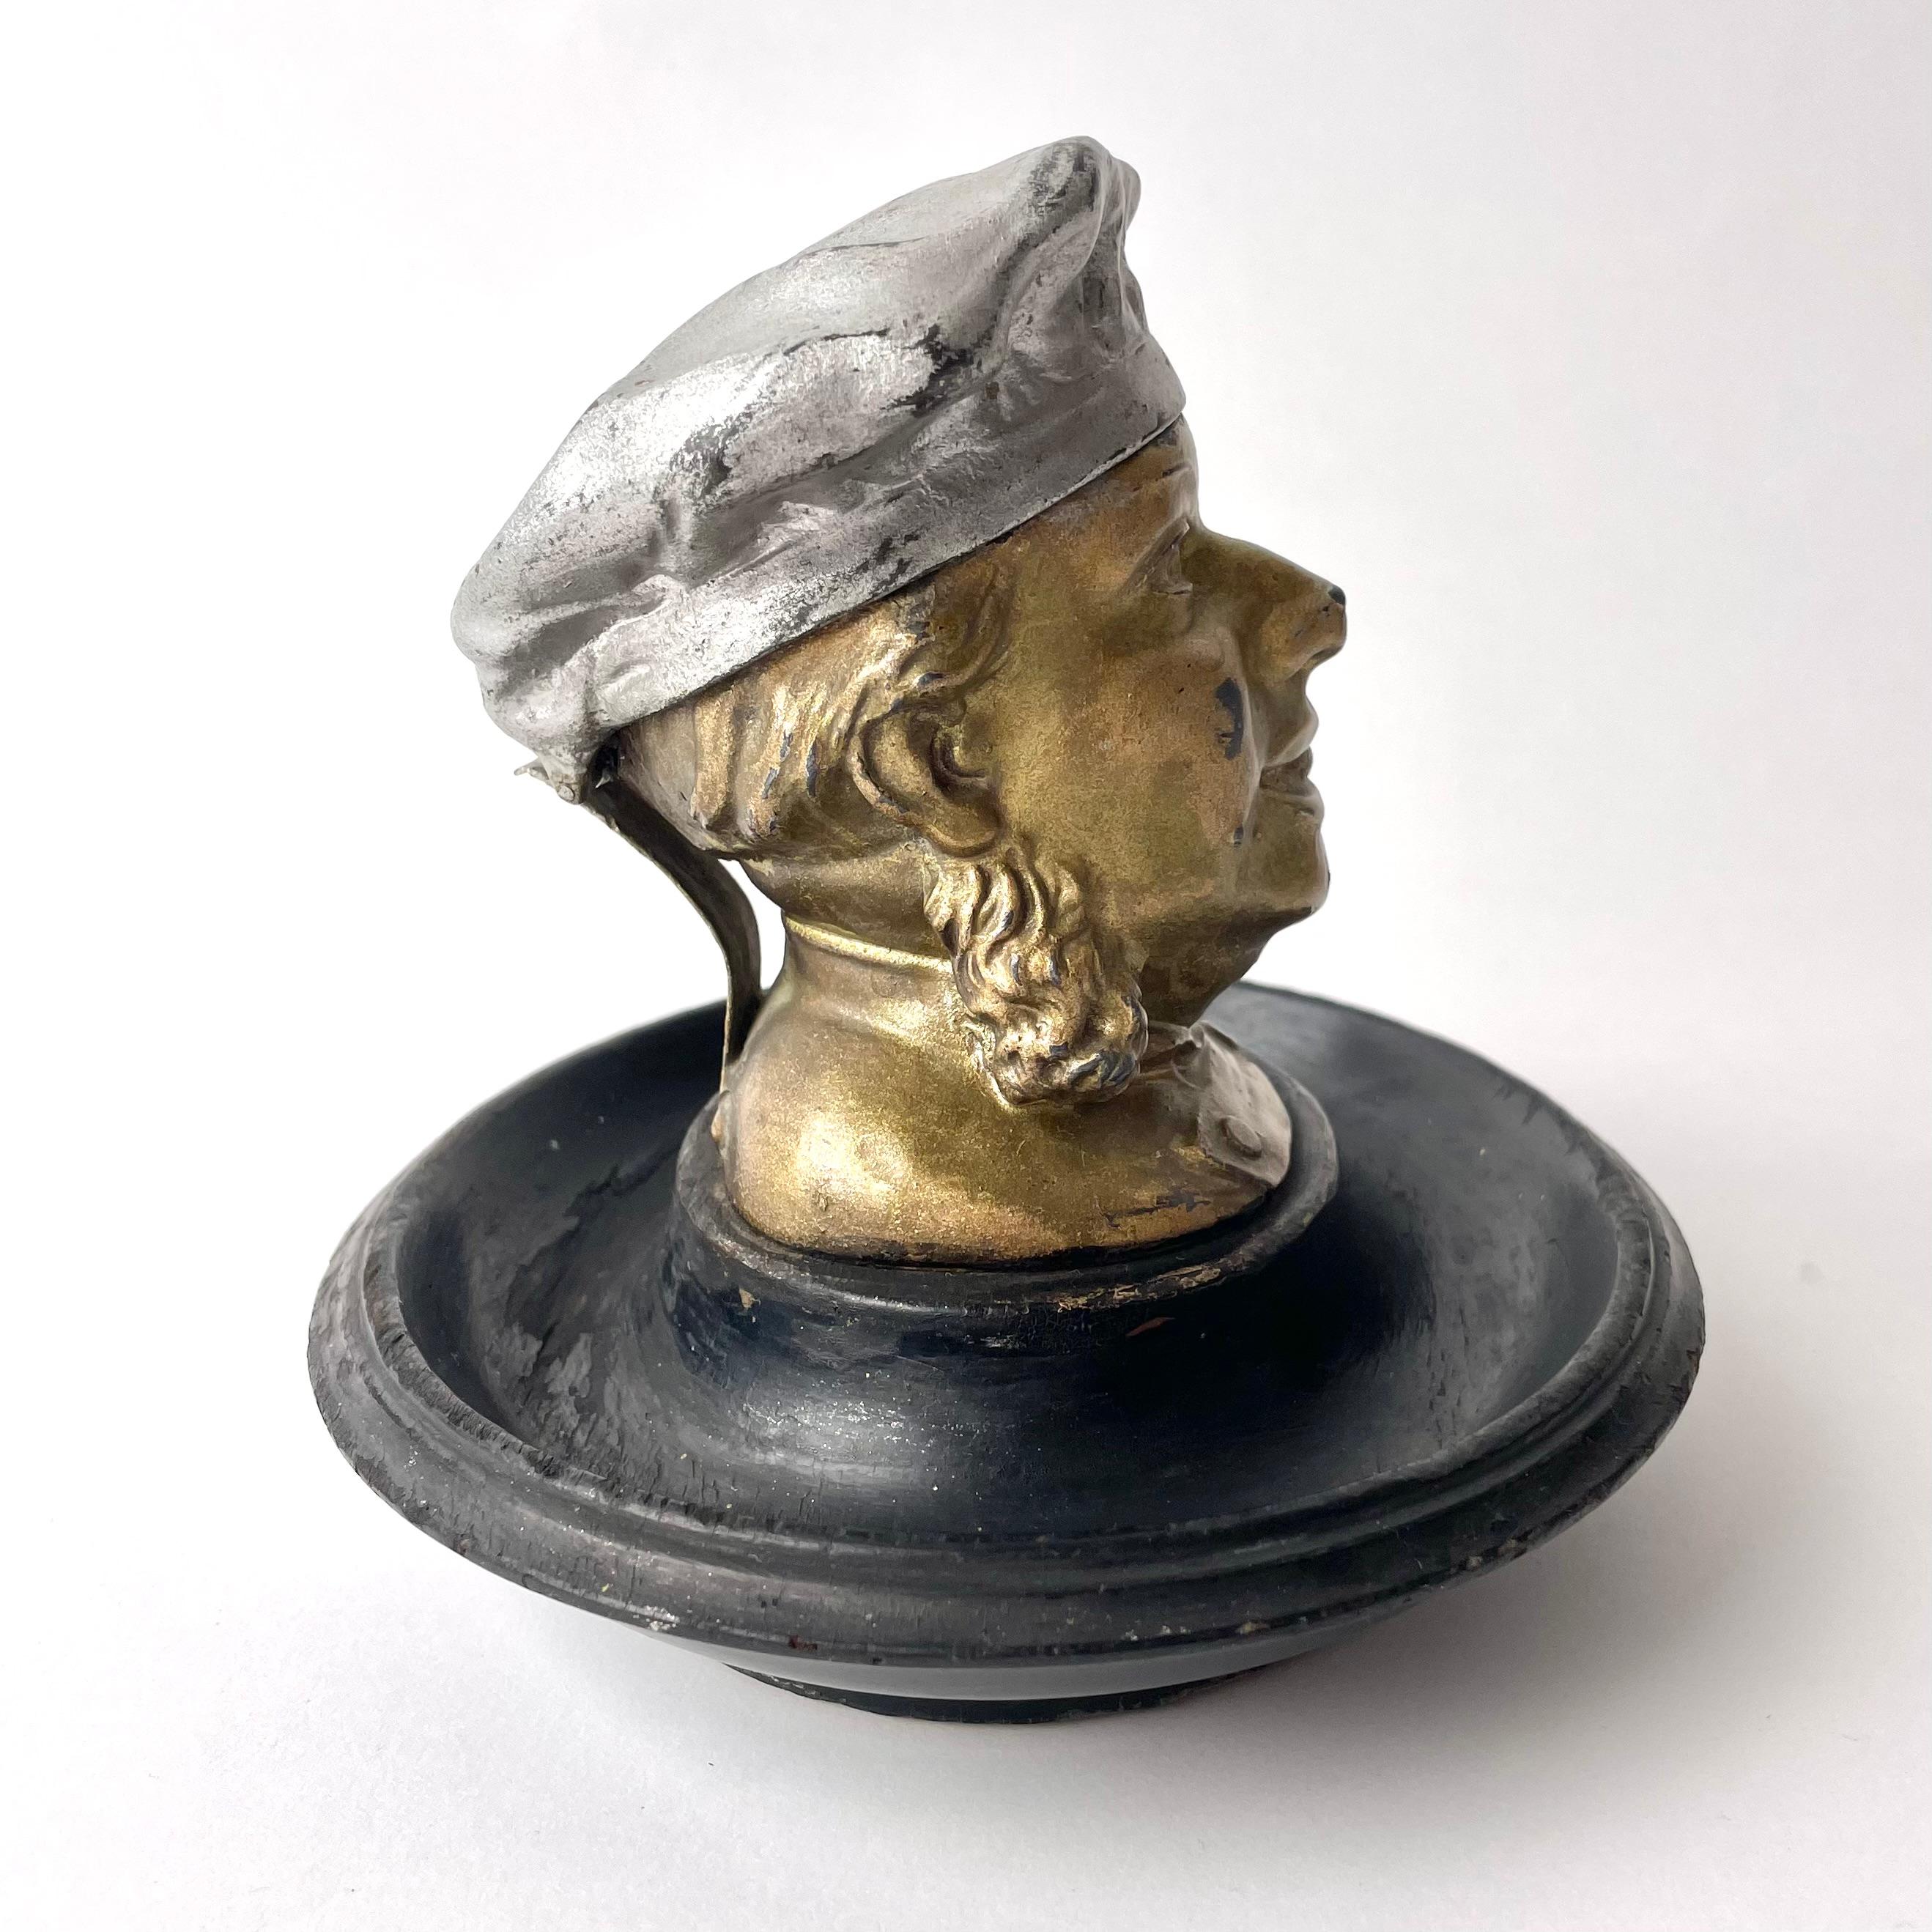 Charming Headshaped Ink Stand, Gilt White Metal Patinated Wood 19th C. England For Sale 1